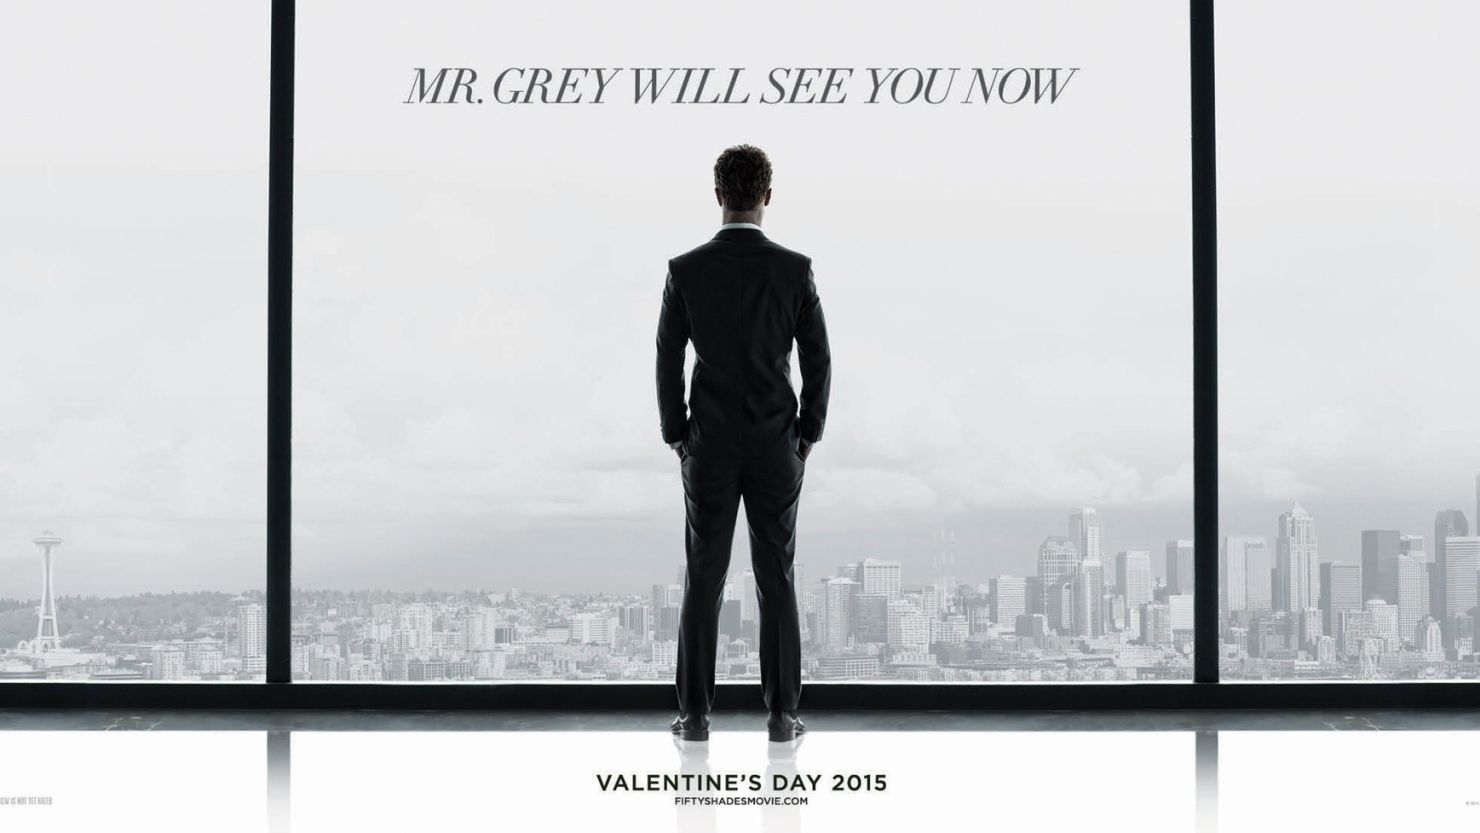 Poster of Focus Features' "Fifty Shades of Grey" film 
